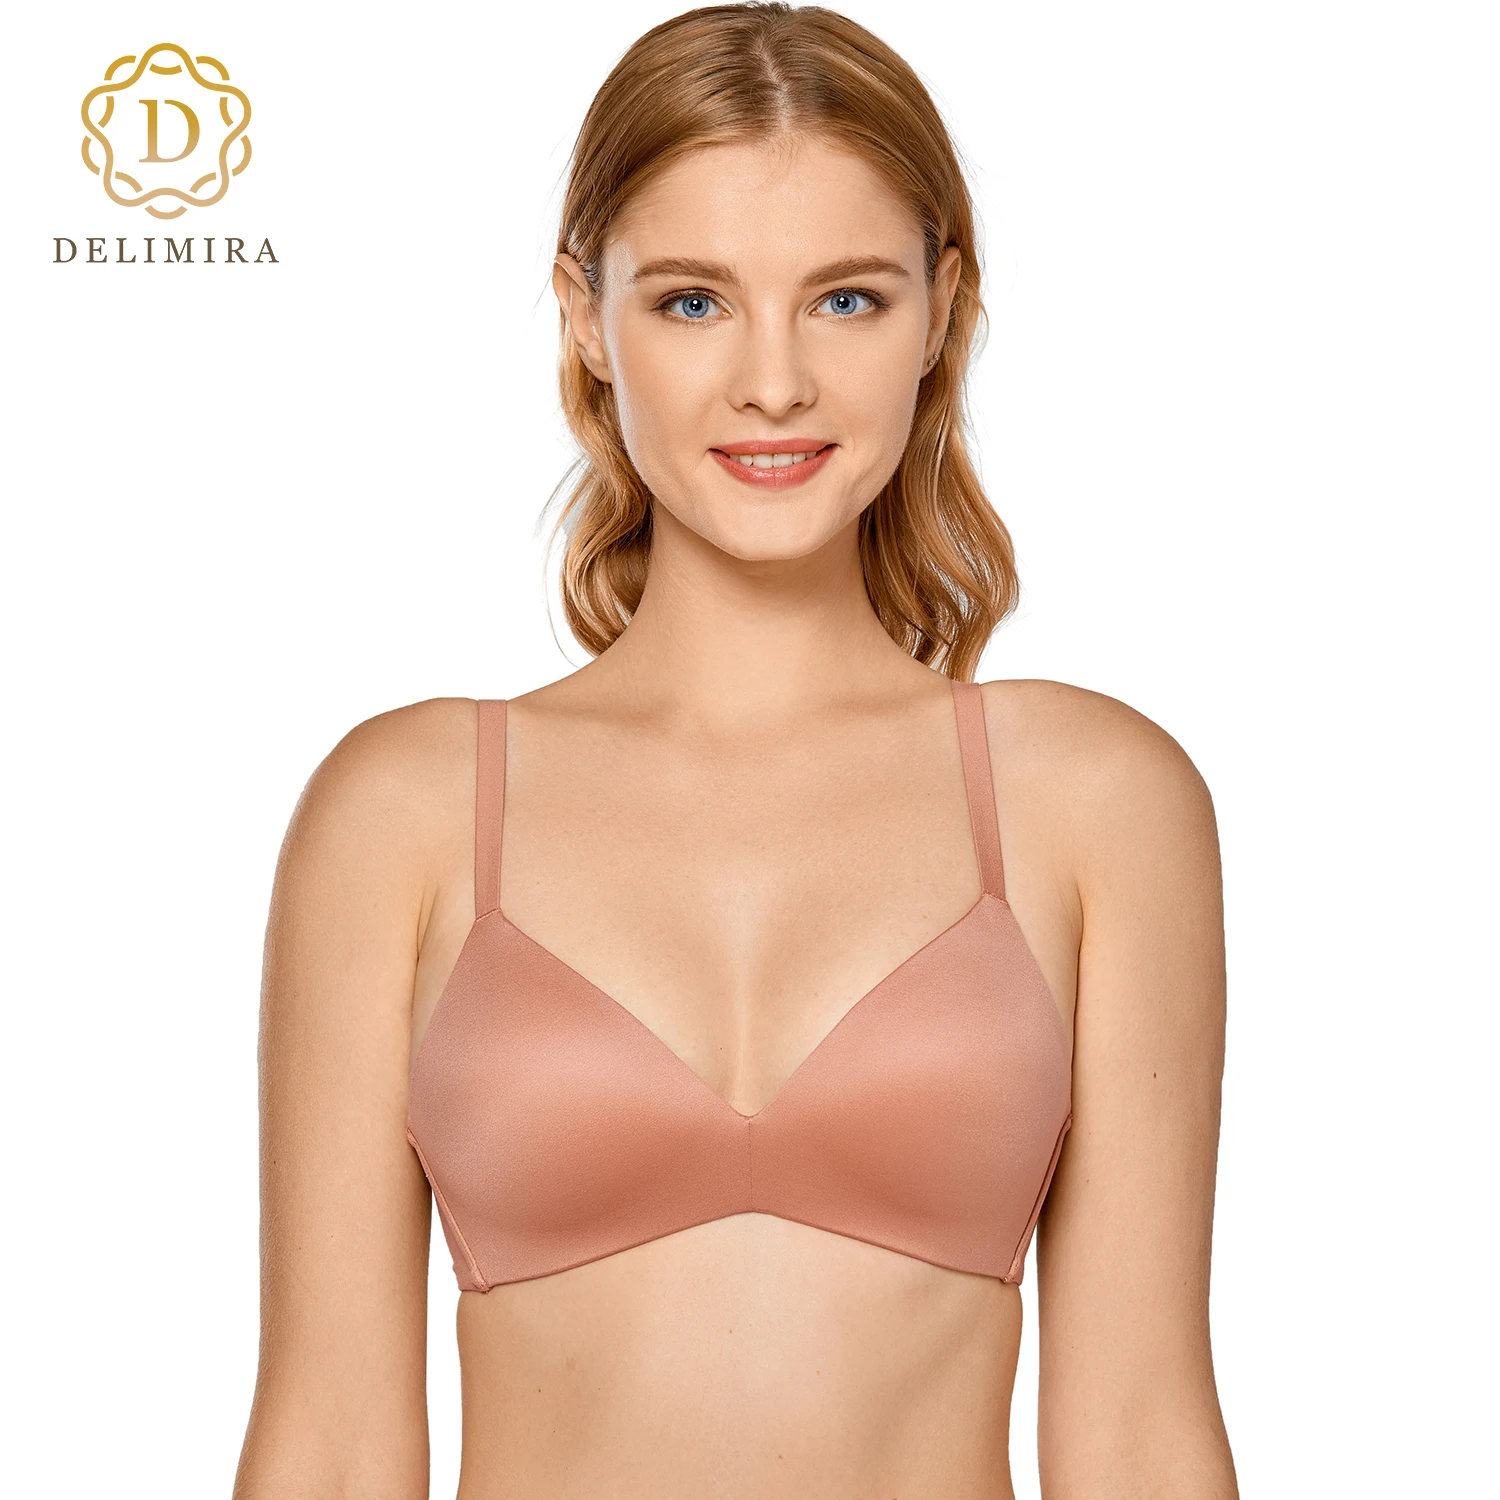 

DELIMIRA Women's Plus Size Seamless T shirt Bra Wirefree Lightly Lined Smooth Comfort Soft Cup Triangle Bras